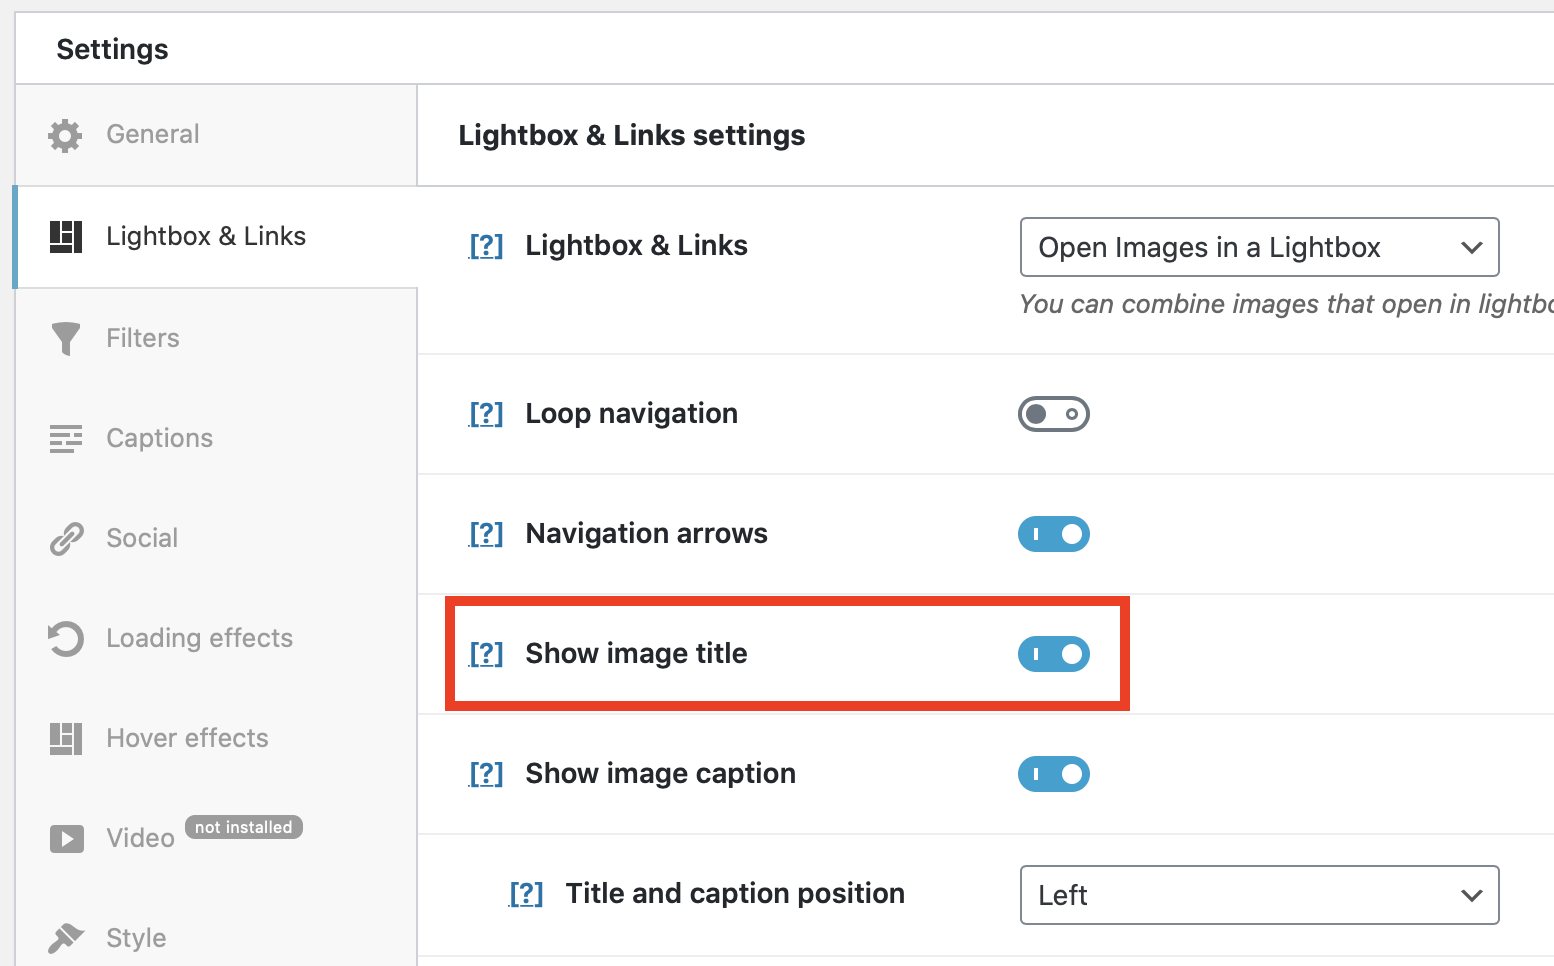 Showing the image title in Lightbox